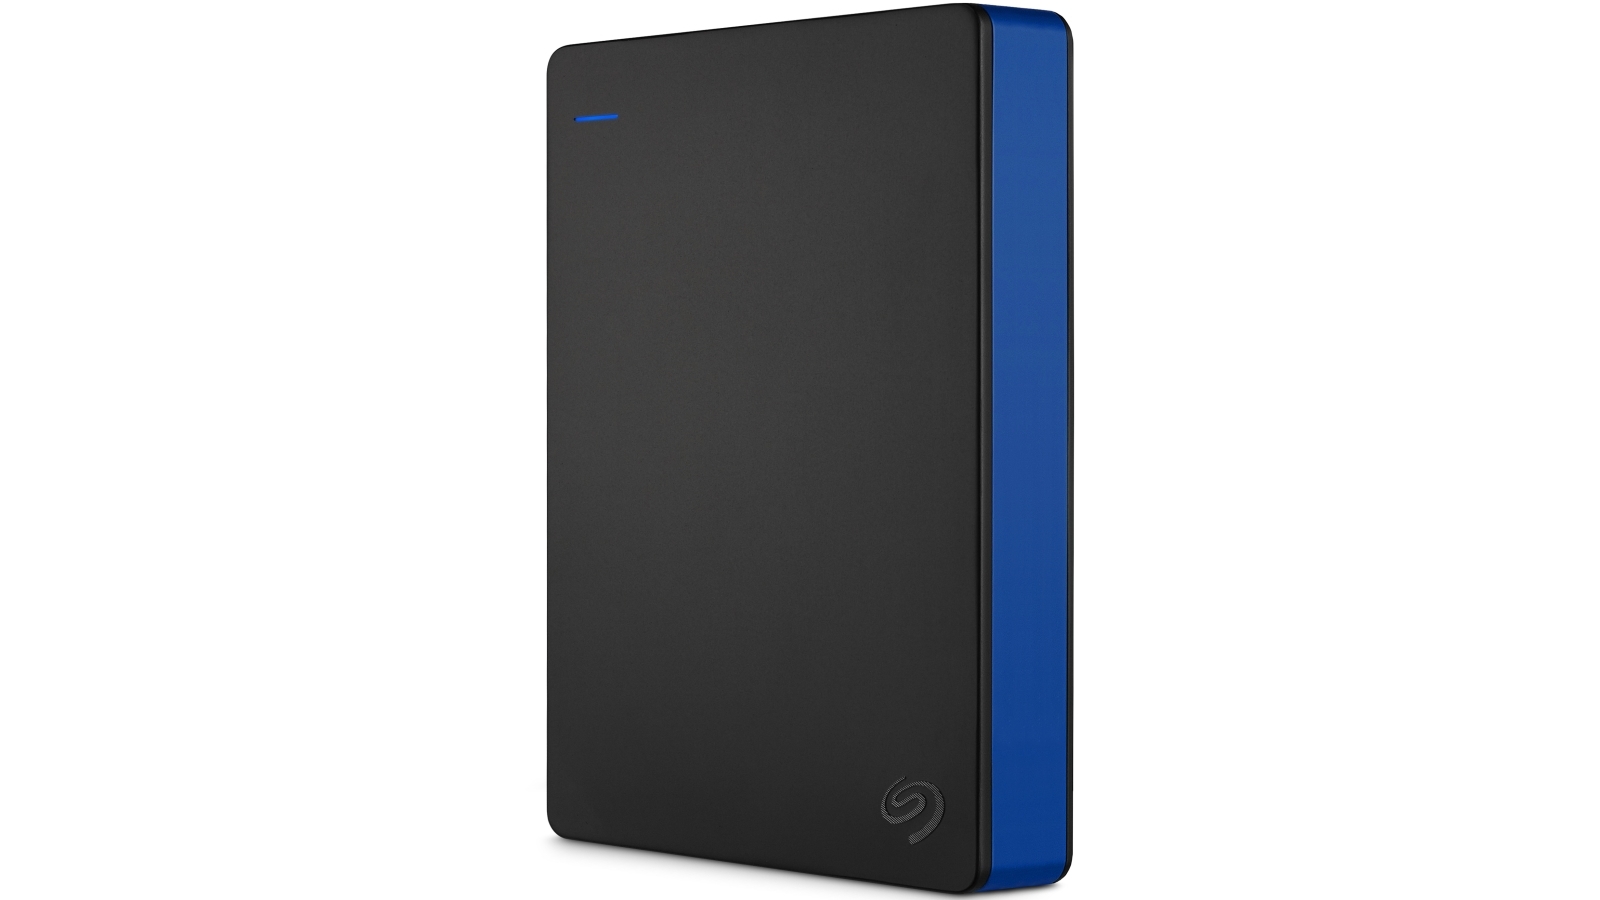 seagate 4tb game drive for playstation 4 portable external usb hard drive